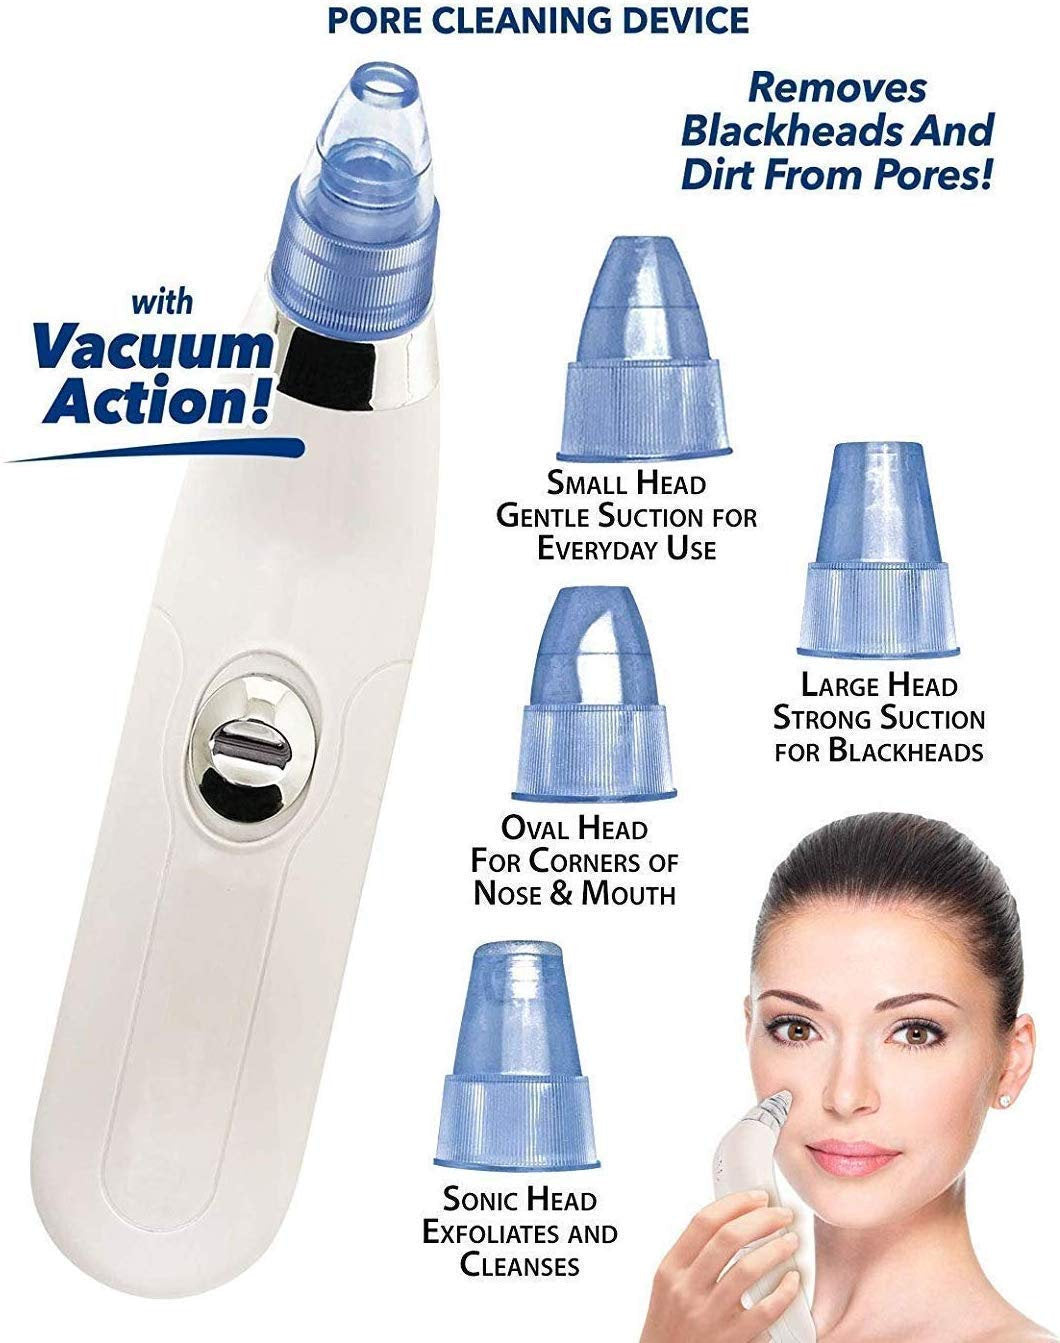 Professional Blackhead Remover Device for Clear, Smooth Skin